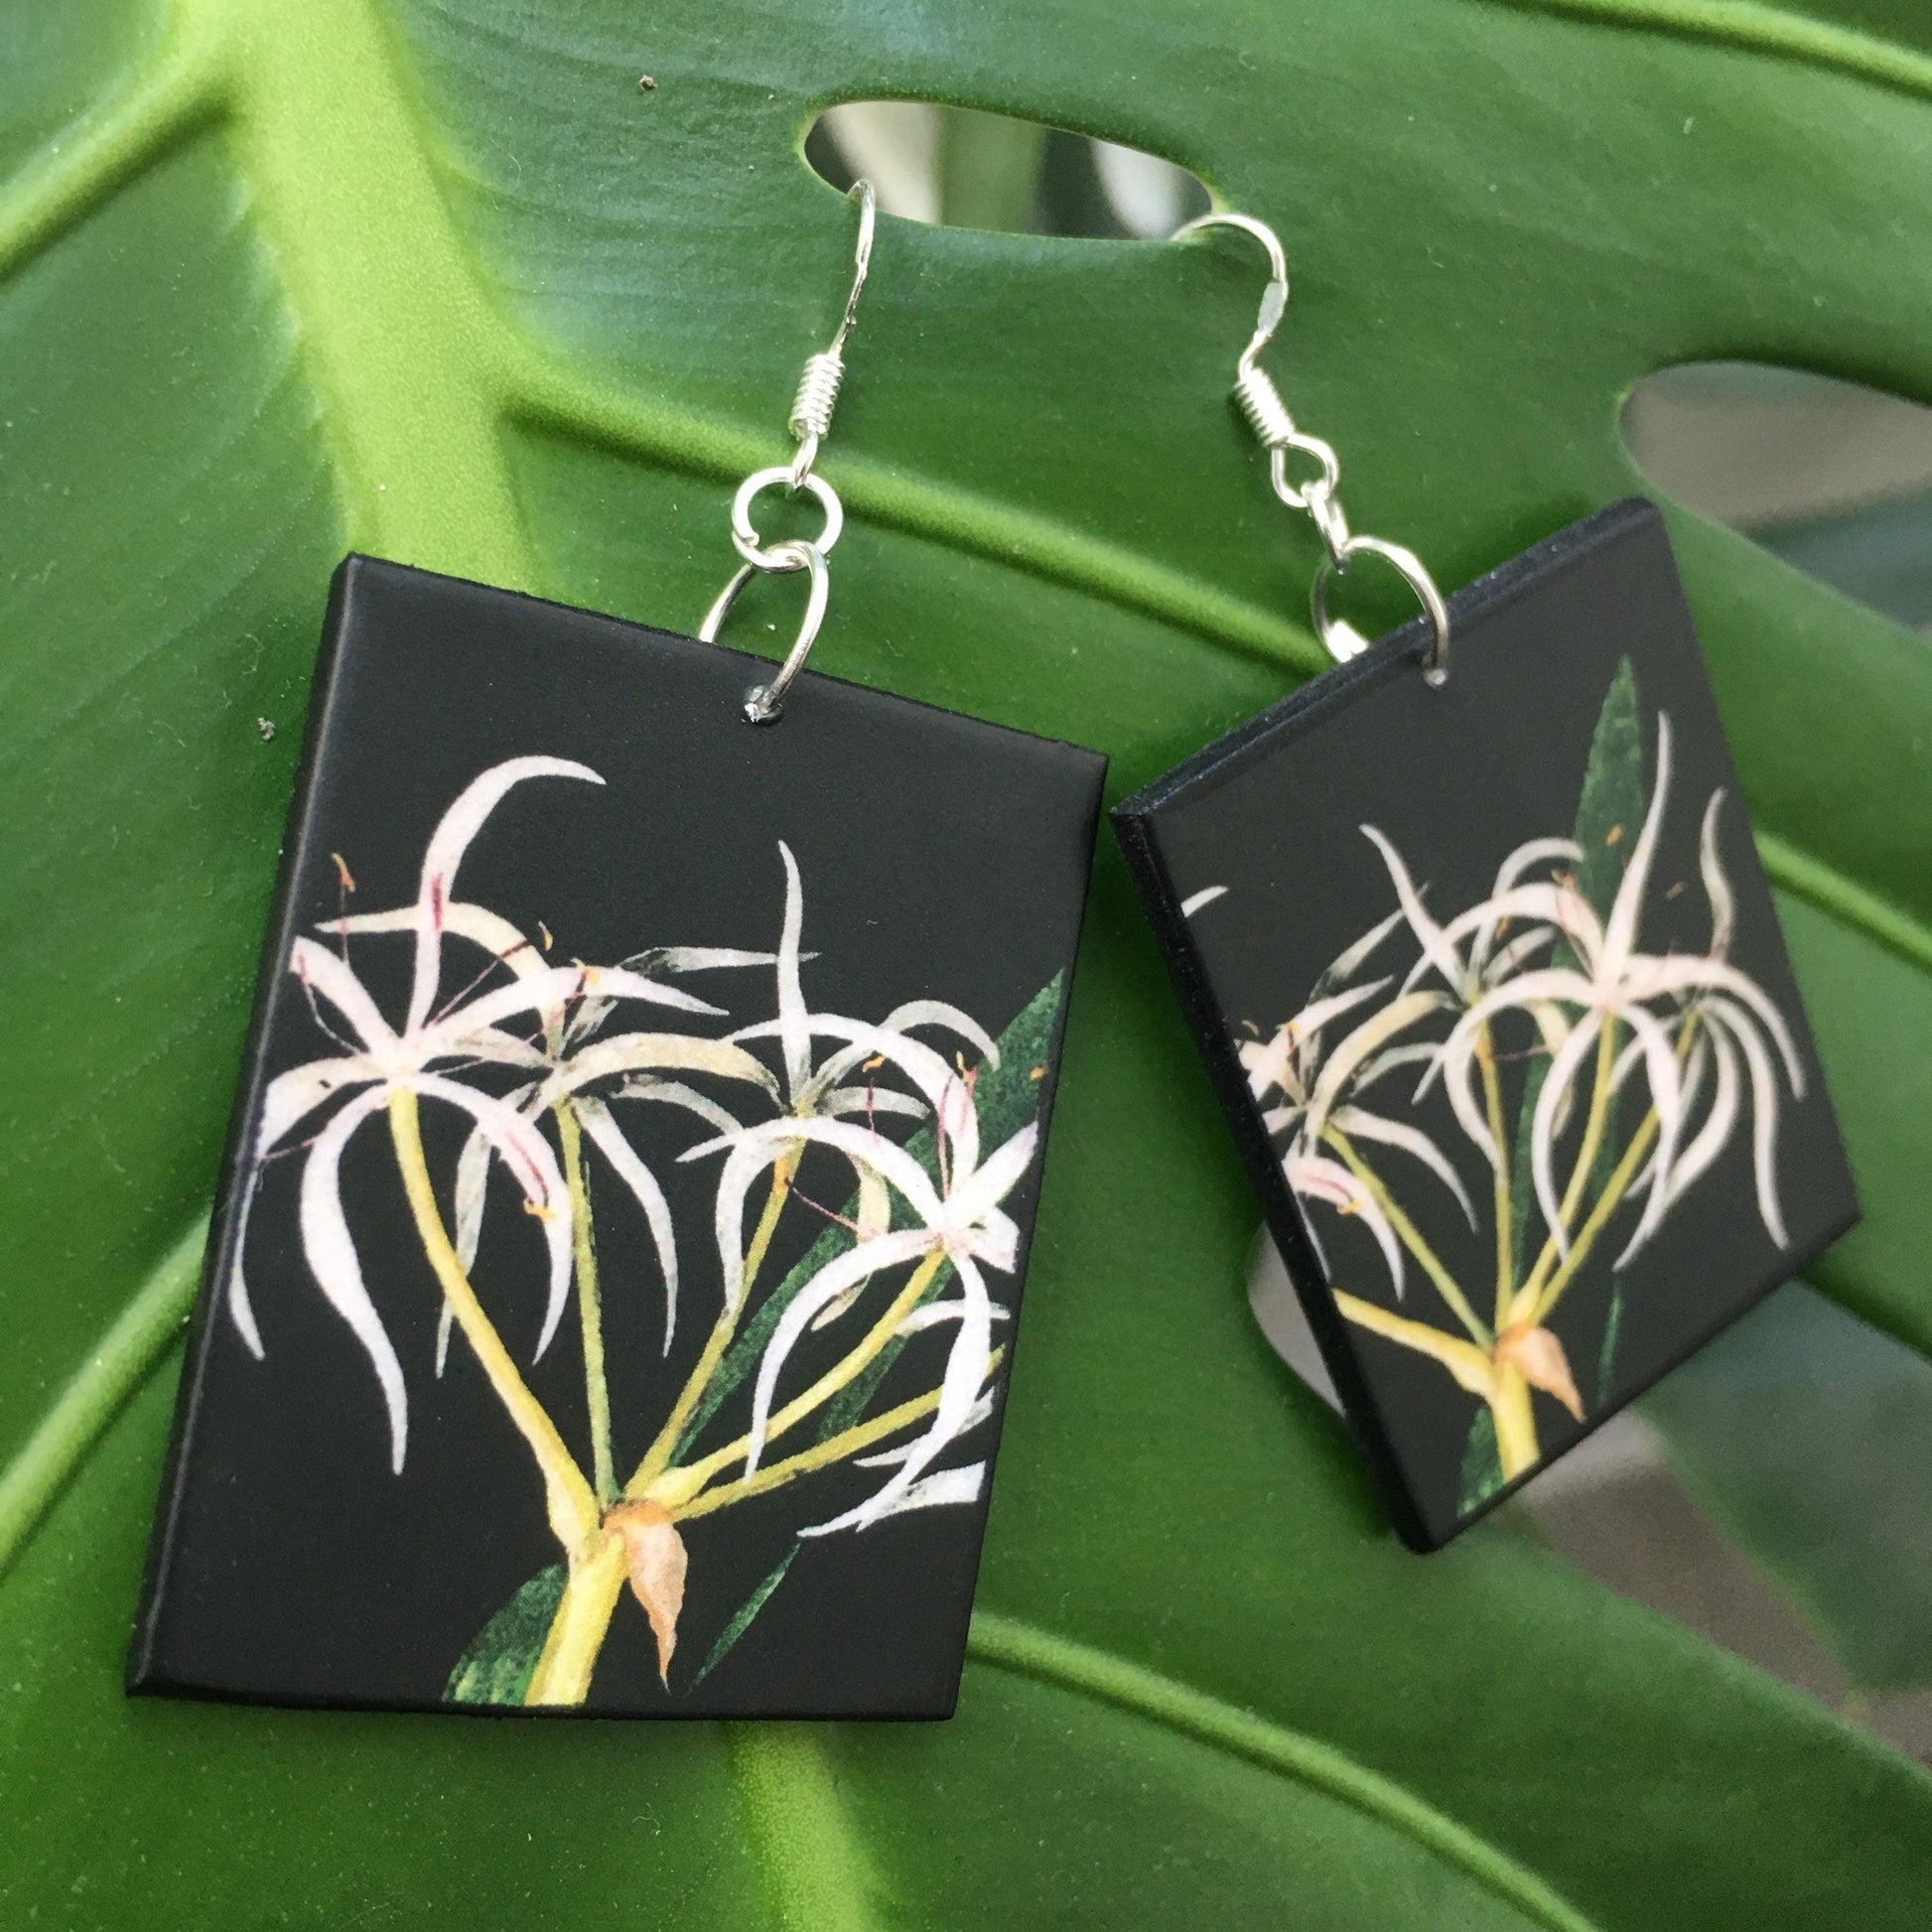 Sustainable wooden earrings inspired by Mary Delany with hypoallergenic sterling silver hooks. These lightweight and charming white flowers earrings are the artsy gift for every occasion,